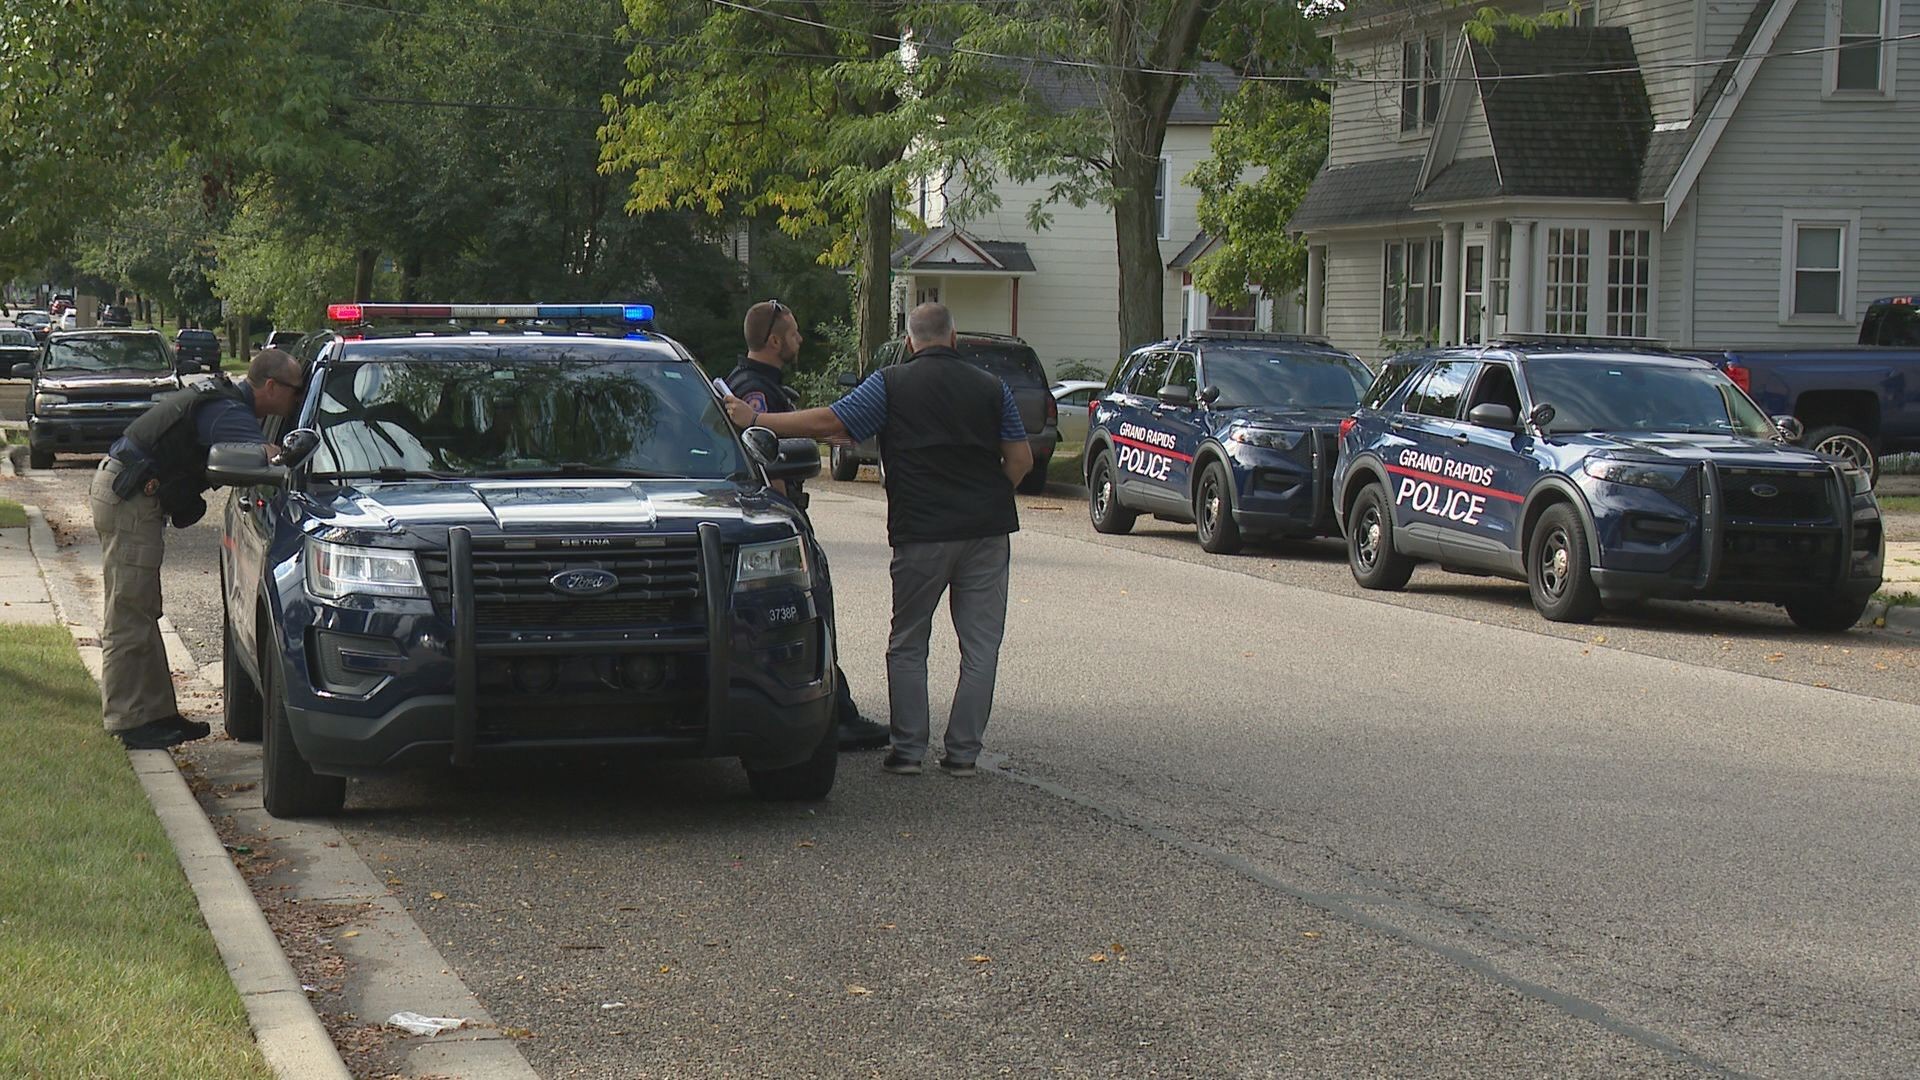 On Tuesday morning, a 2-year-old on Coit Avenue in Grand Rapids found his mom's handgun and fired a round. Police say he is minorly injured.